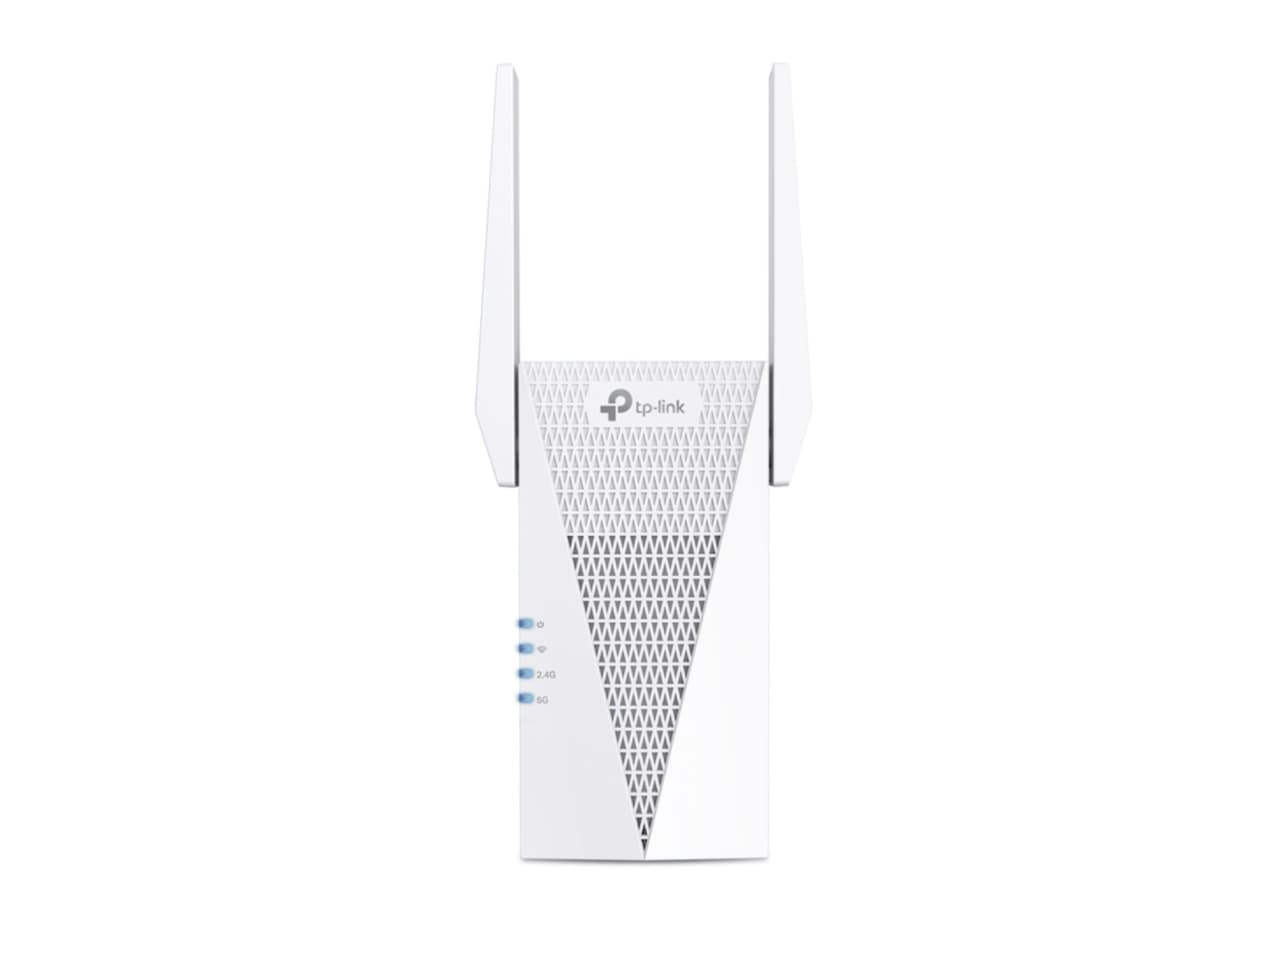 TP-Link AX3000 Dual-Band Wi-Fi 6 Range Extender White RE705X - Best Buy